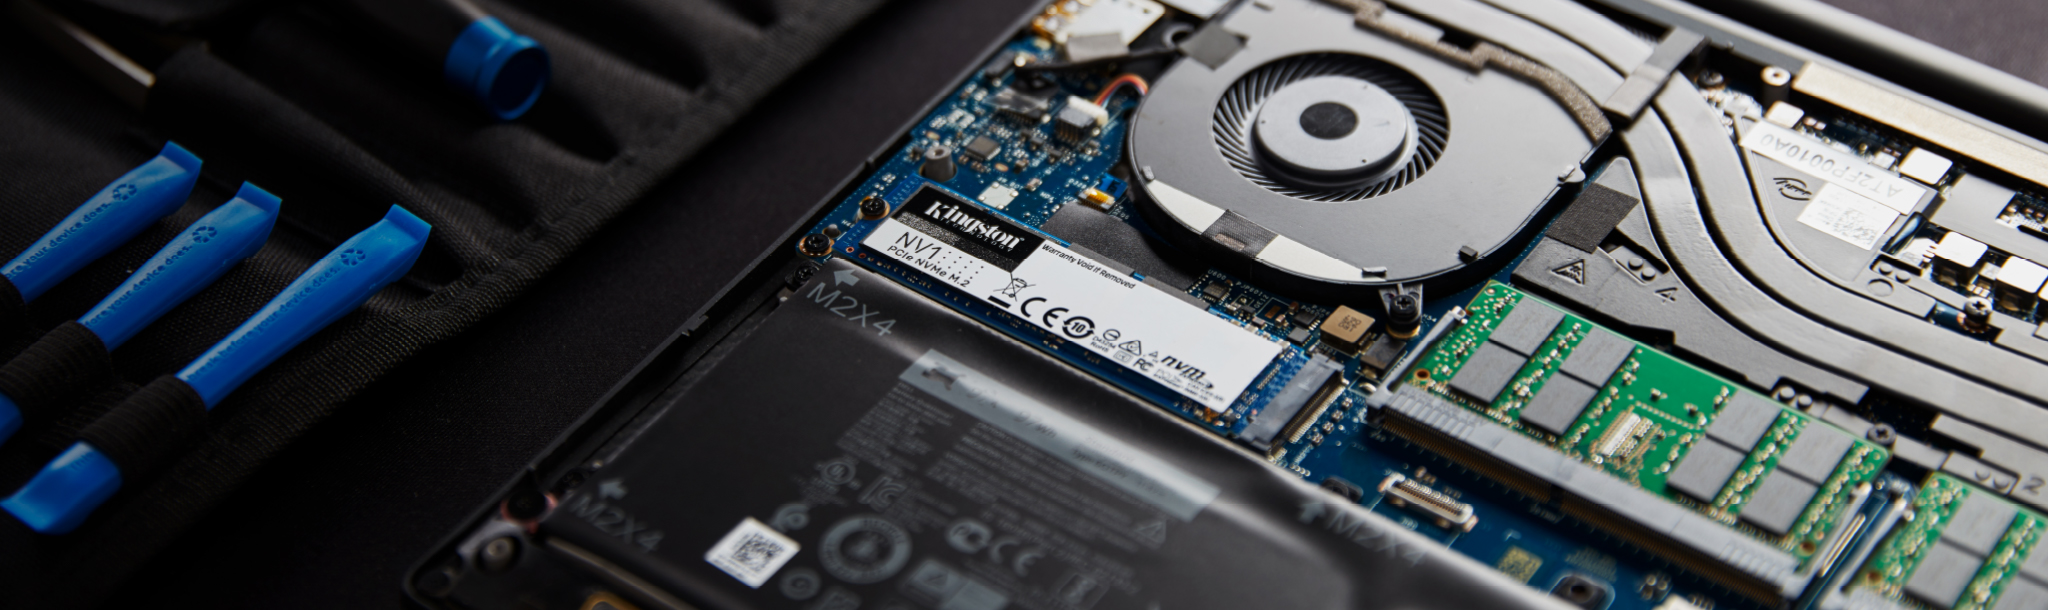 meat spot alliance Improve Your PC or laptop's Performance with SSDs and More Memory -  Kingston Technology